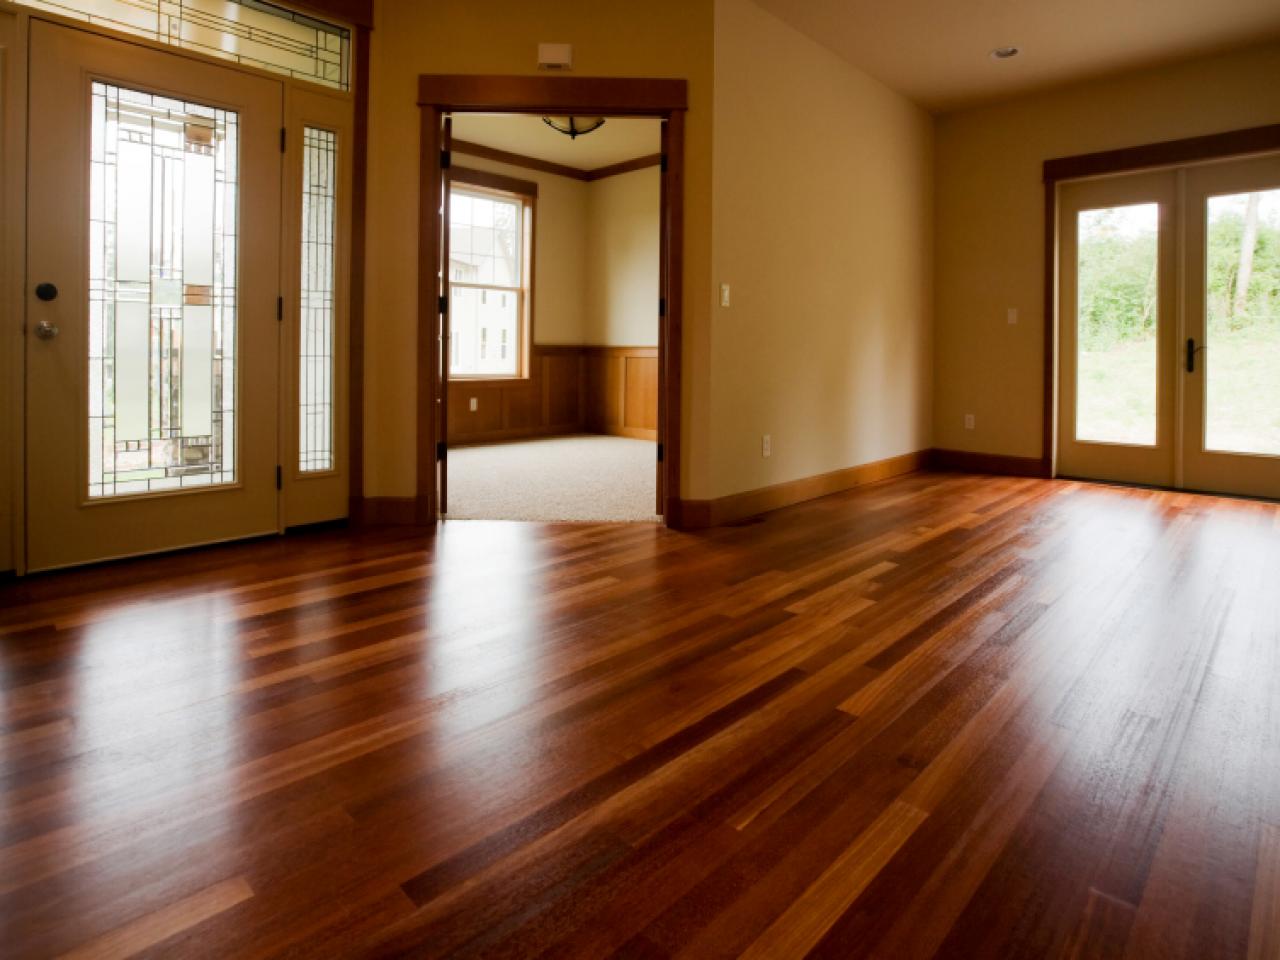 Cleaning Tile Wood And Vinyl Floors, How To Clean And Sanitize Hardwood Floors